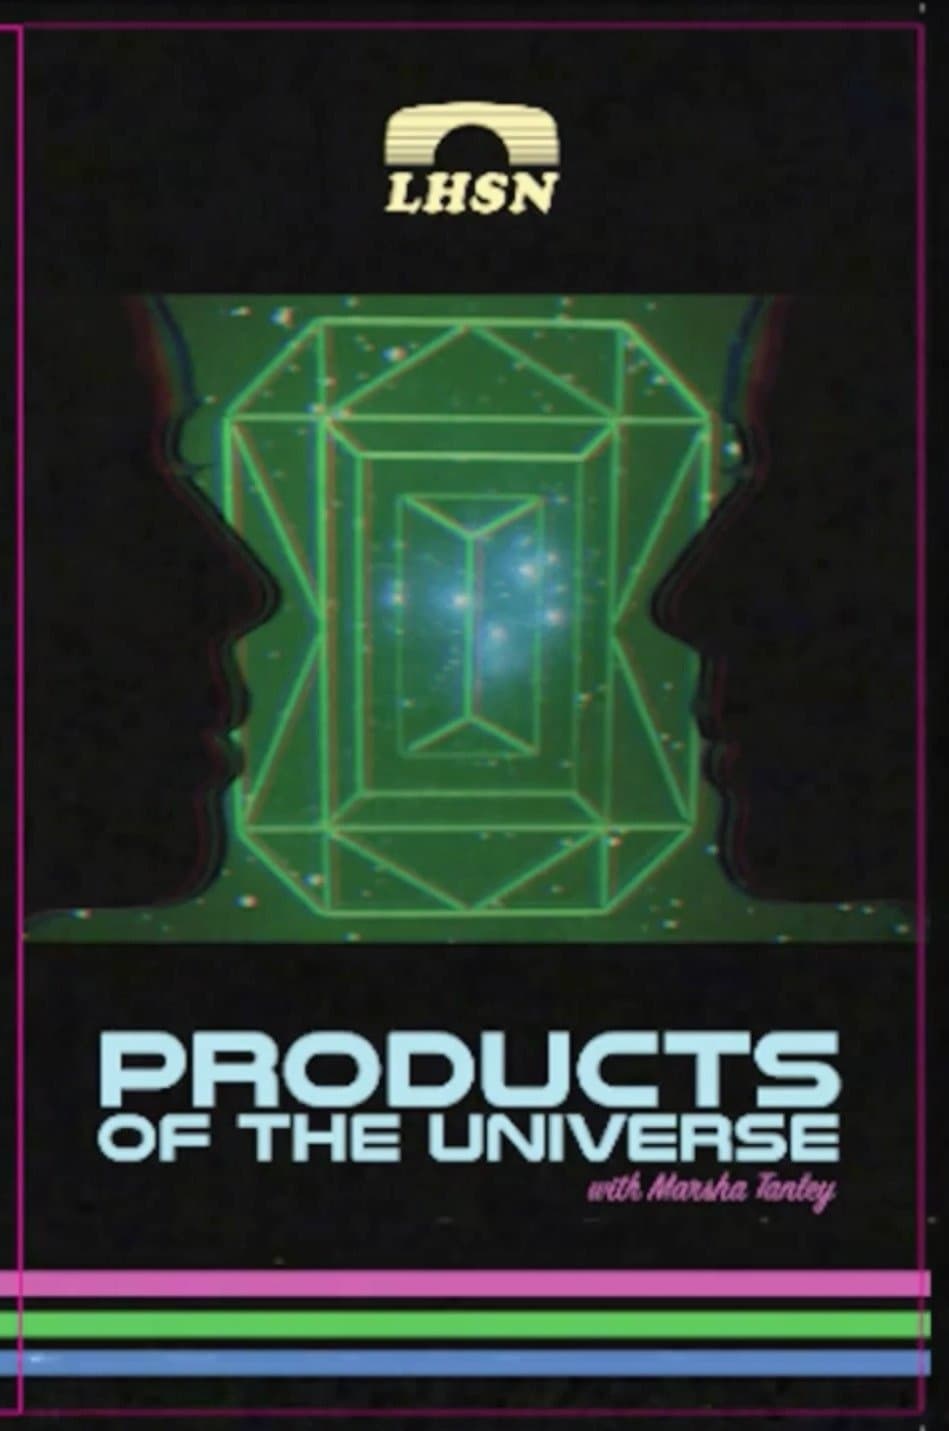 Products of the Universe with Marsha Tanley